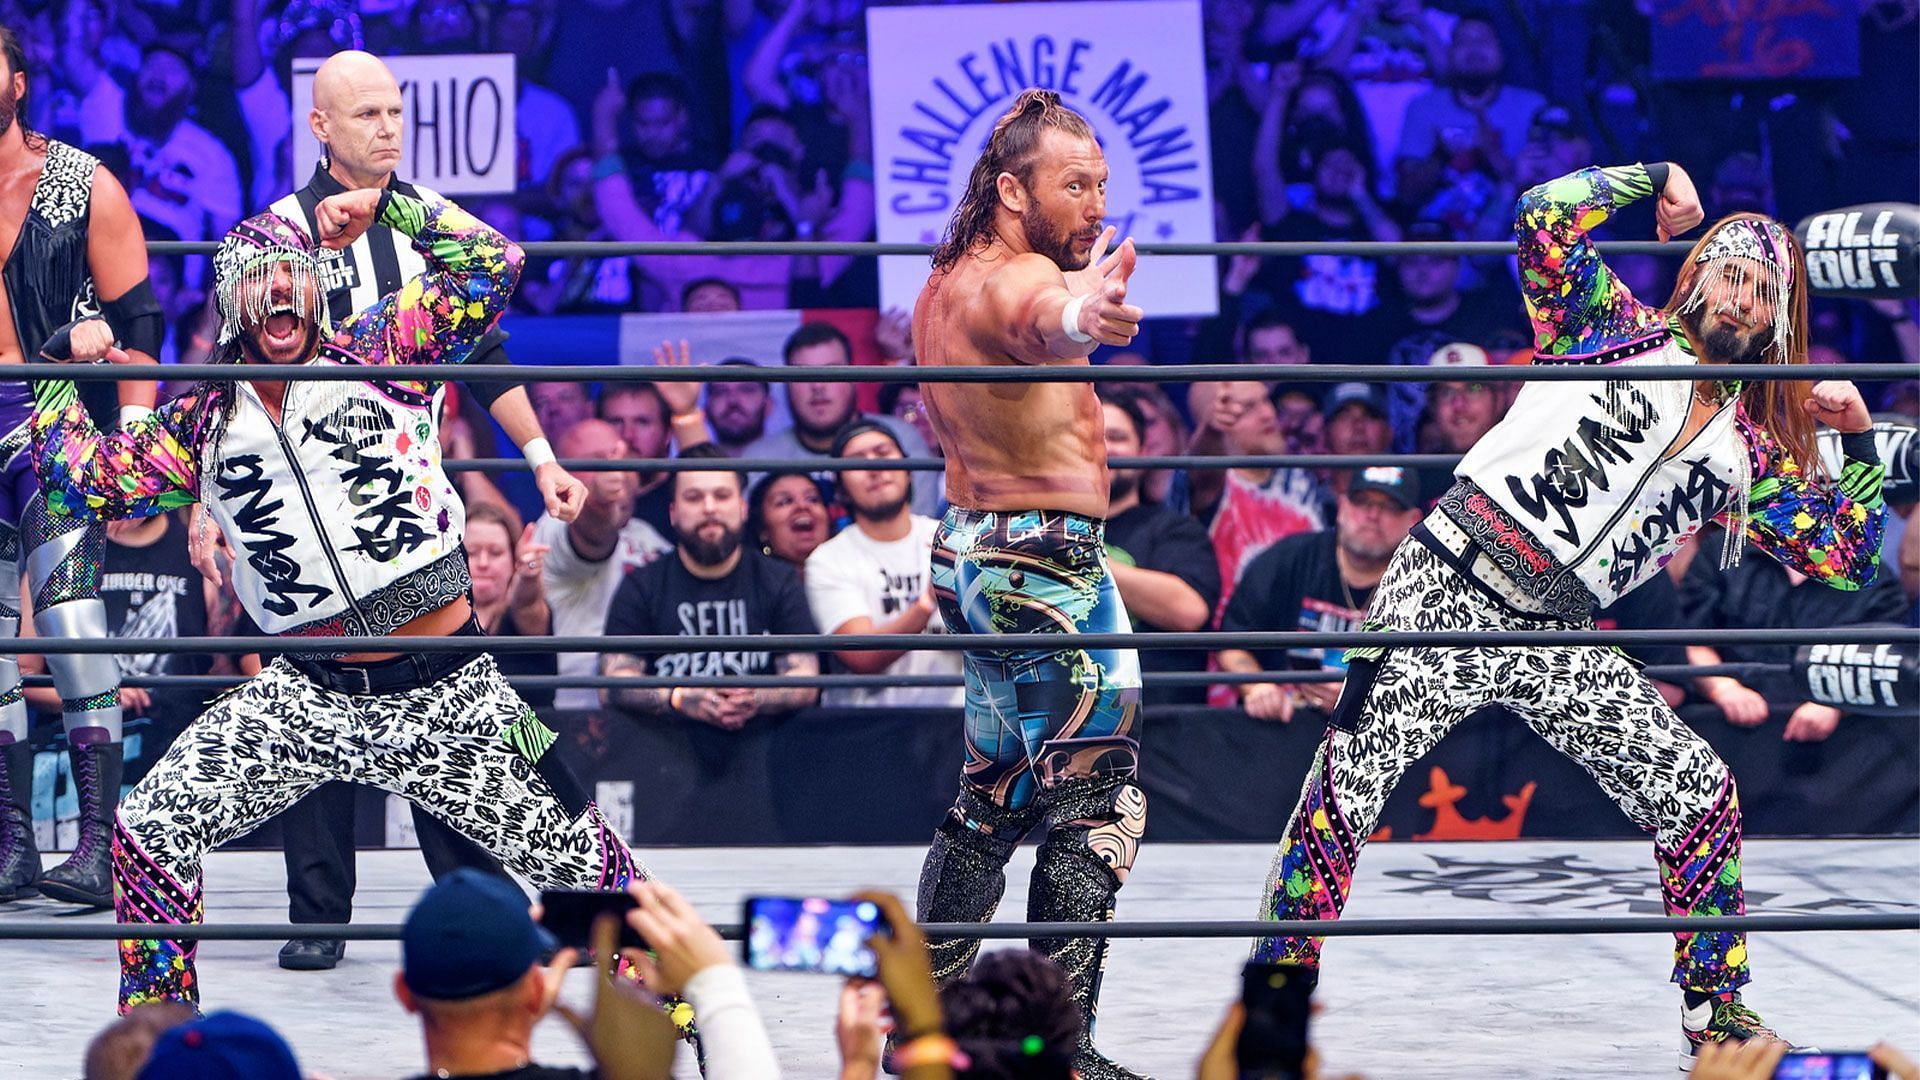 Kenny Omega and the Yong Bucks will Return to AEW at Full Gear